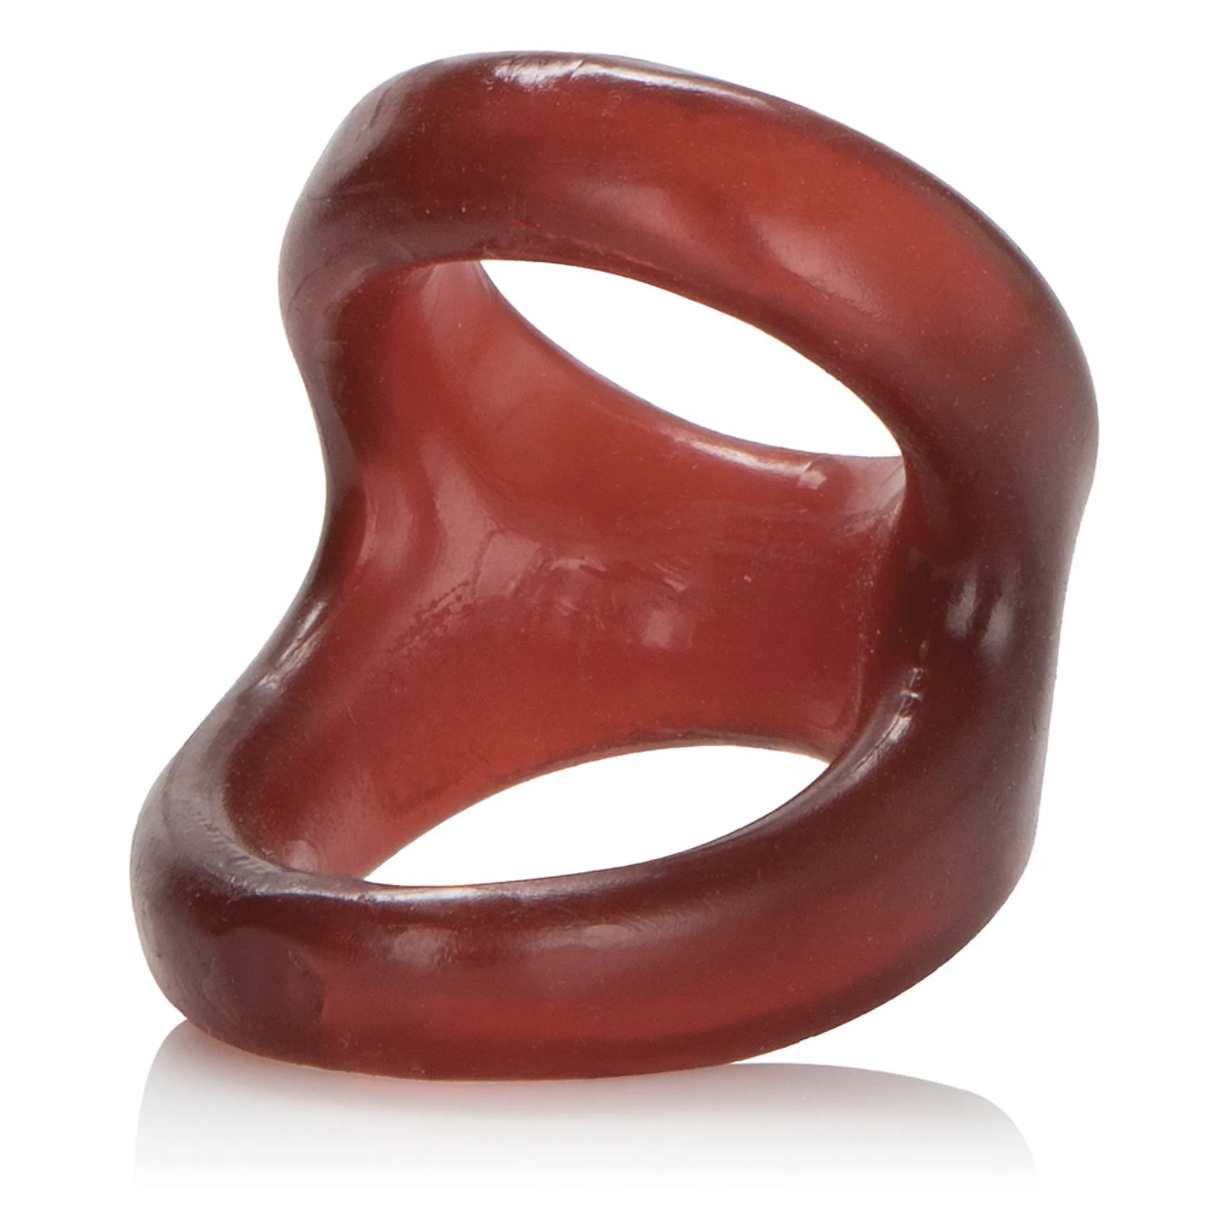 Red penis ring with curved sides